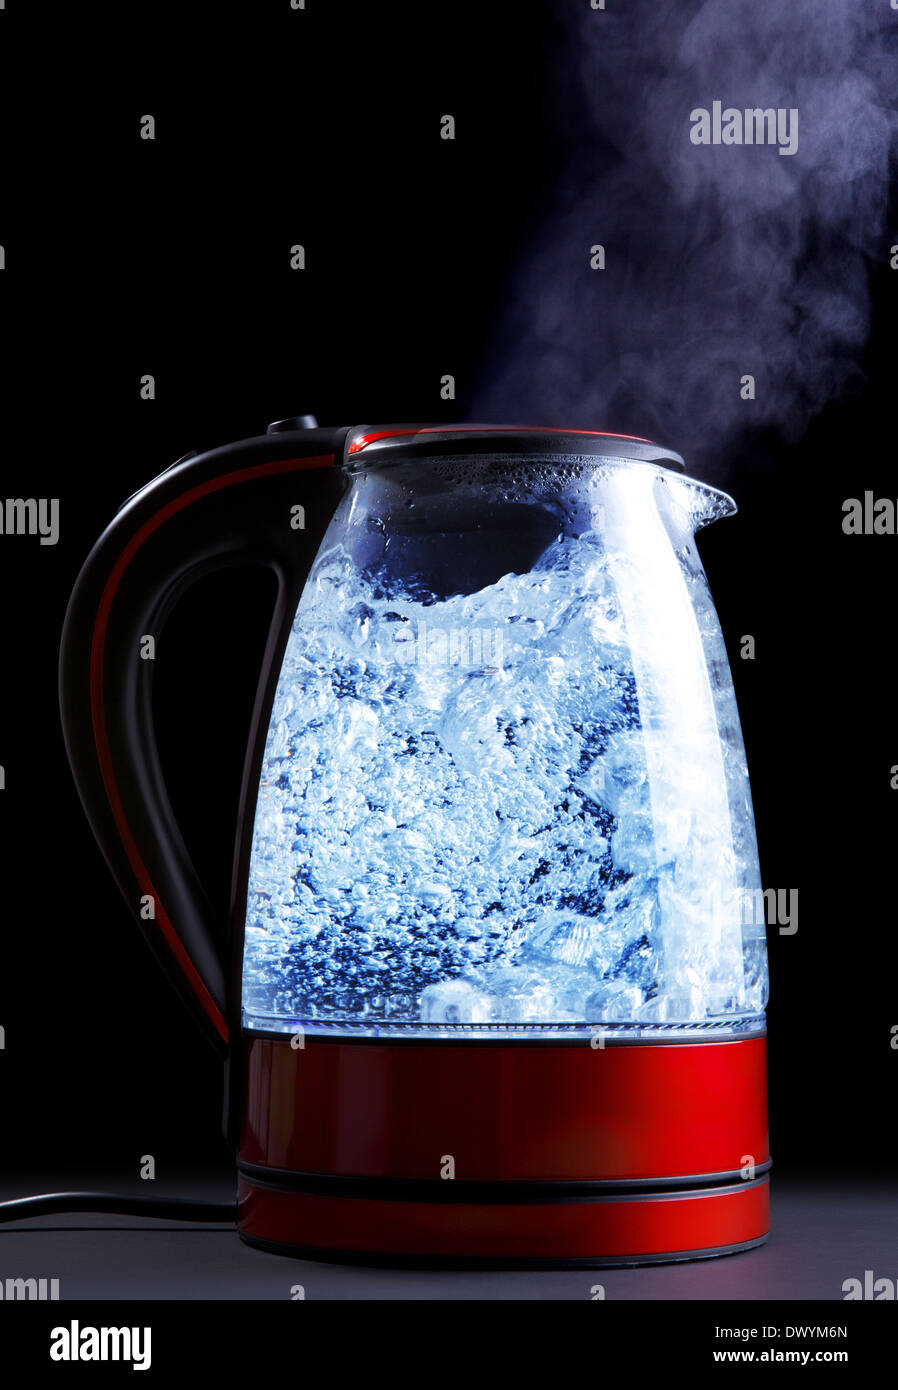 Boiling Water In Glass Kettle Stock Photo - Download Image Now